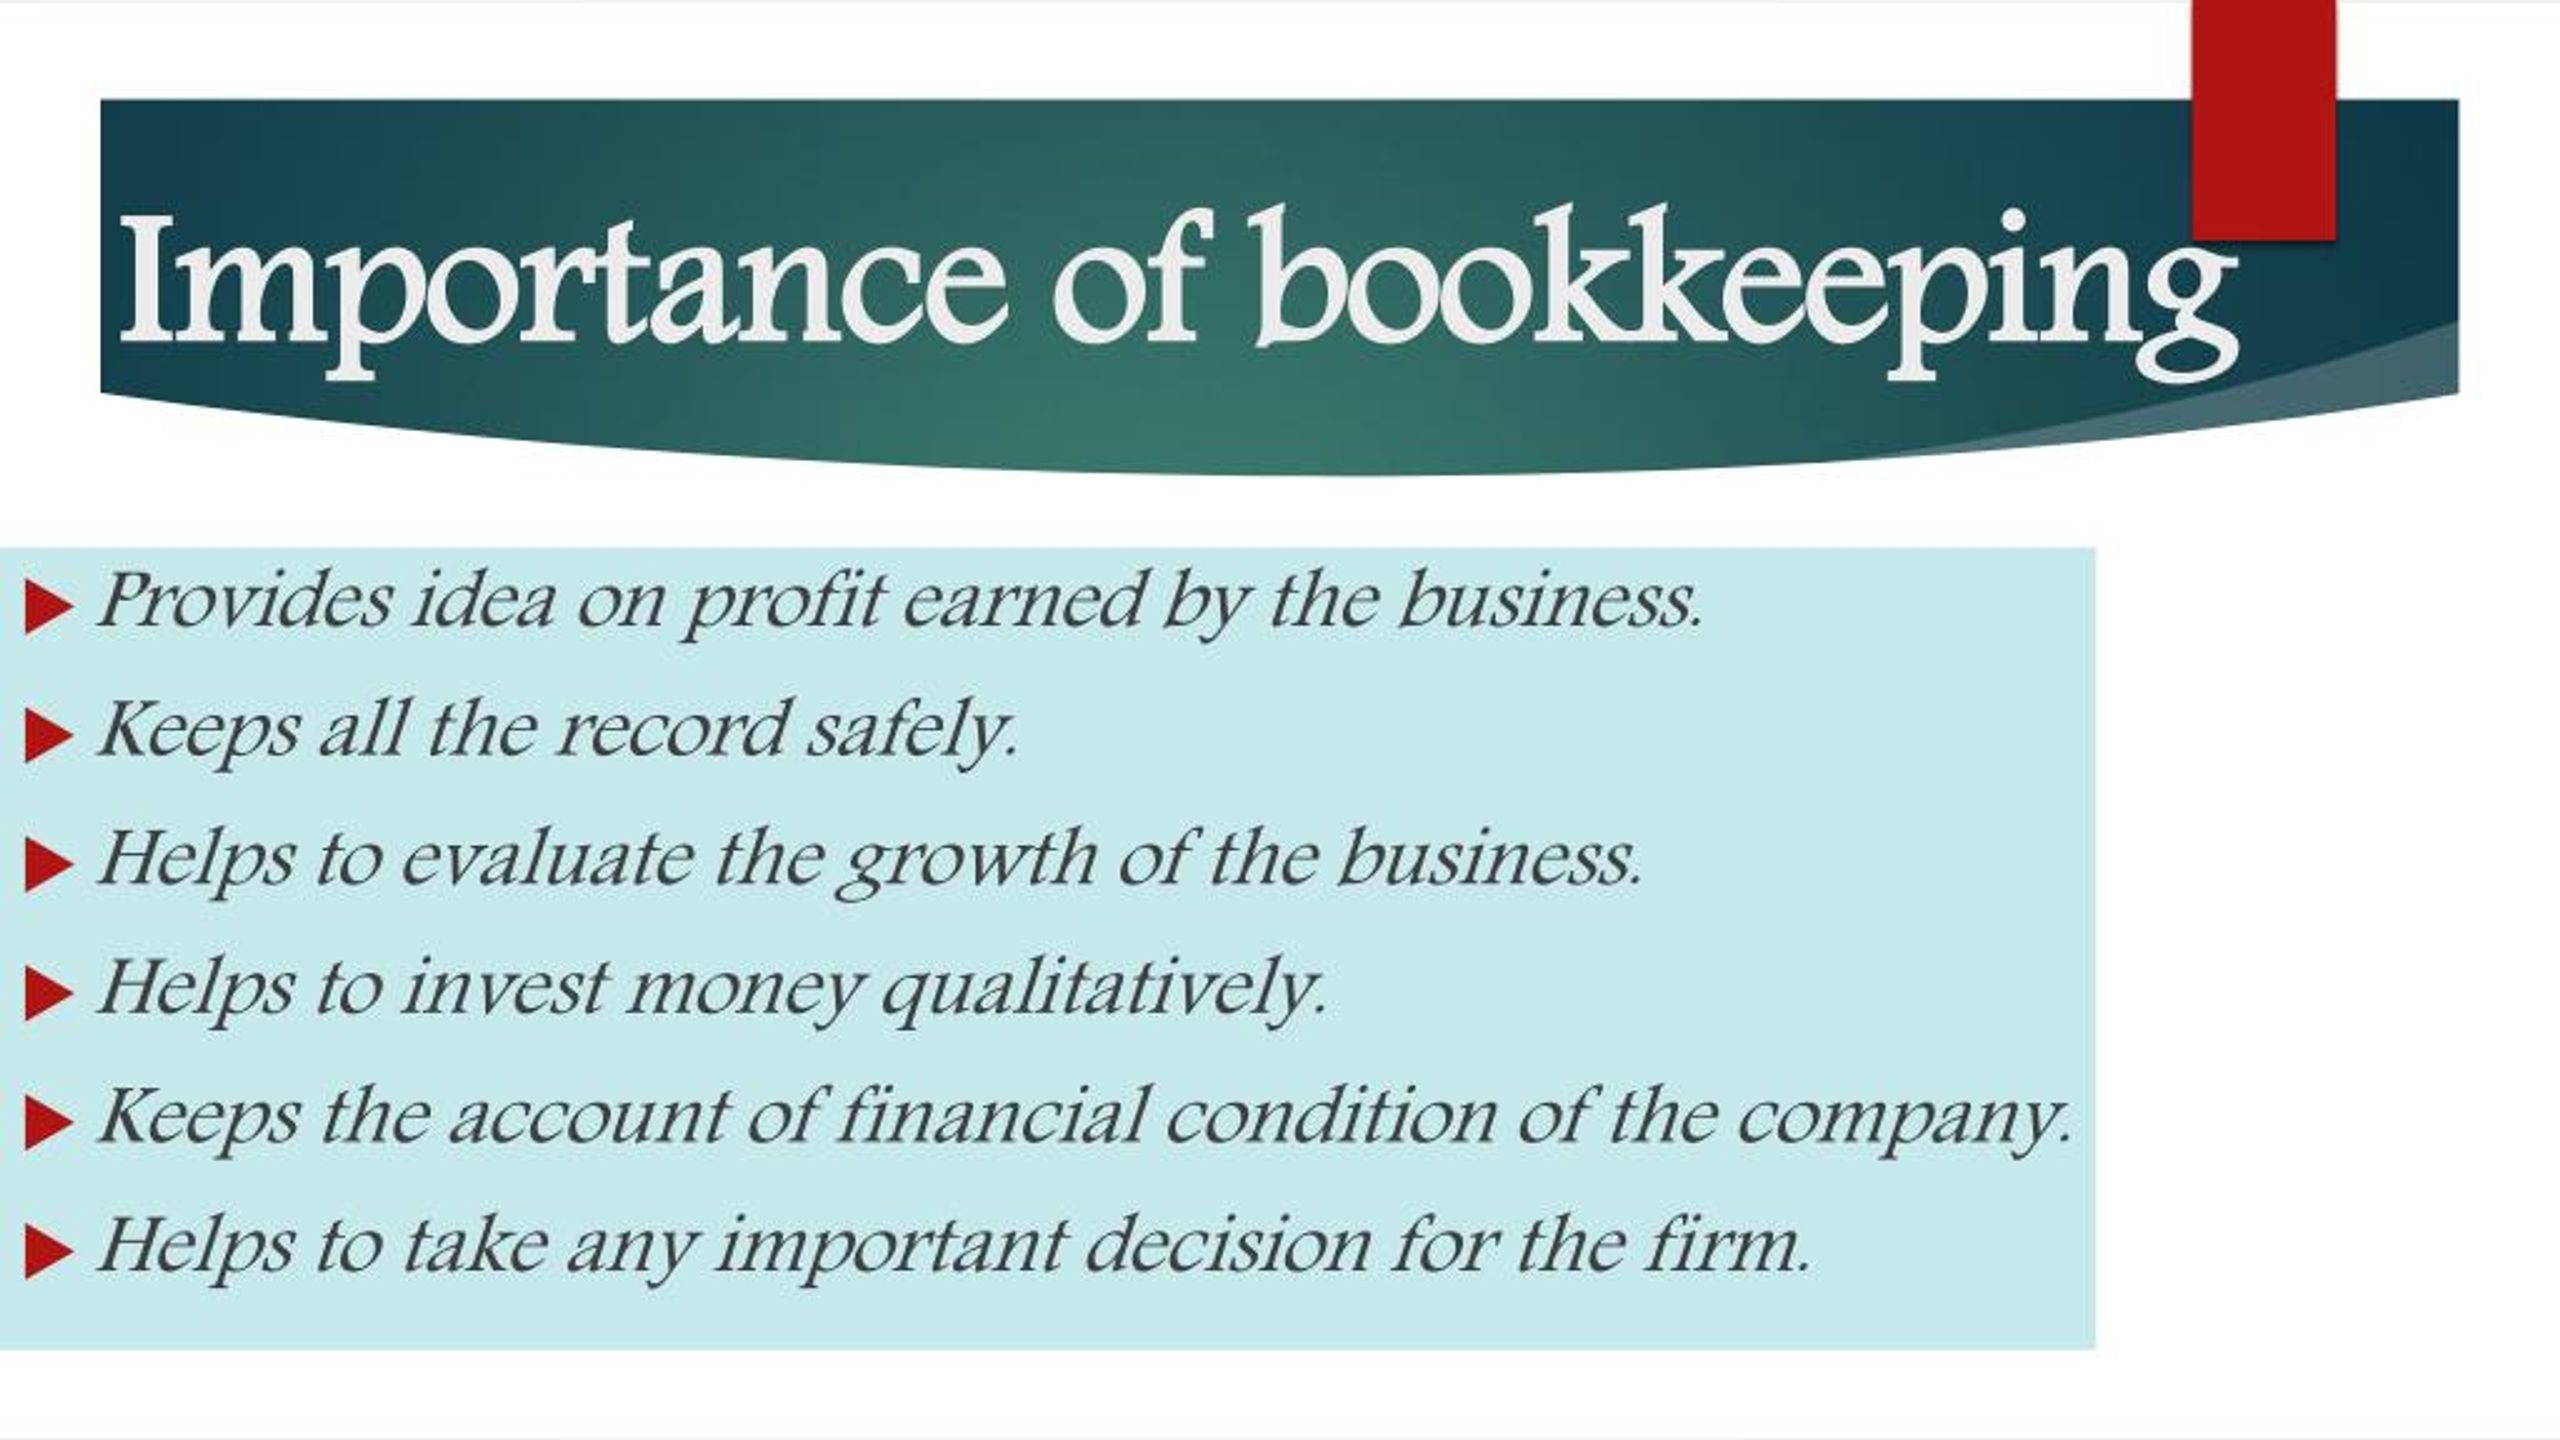 importance of bookkeeping and accounting